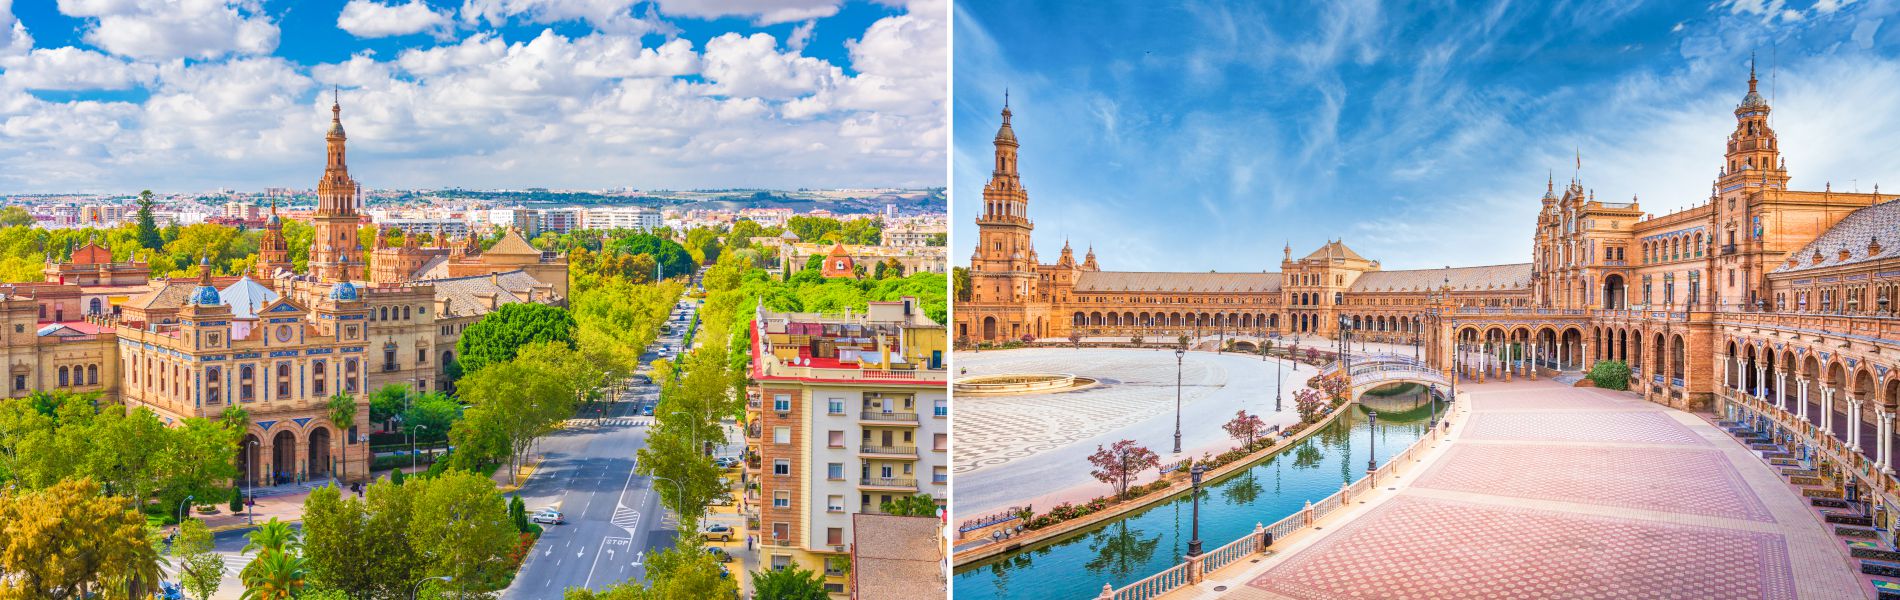 Eclectic Spain - 9 Days / 8 Nights